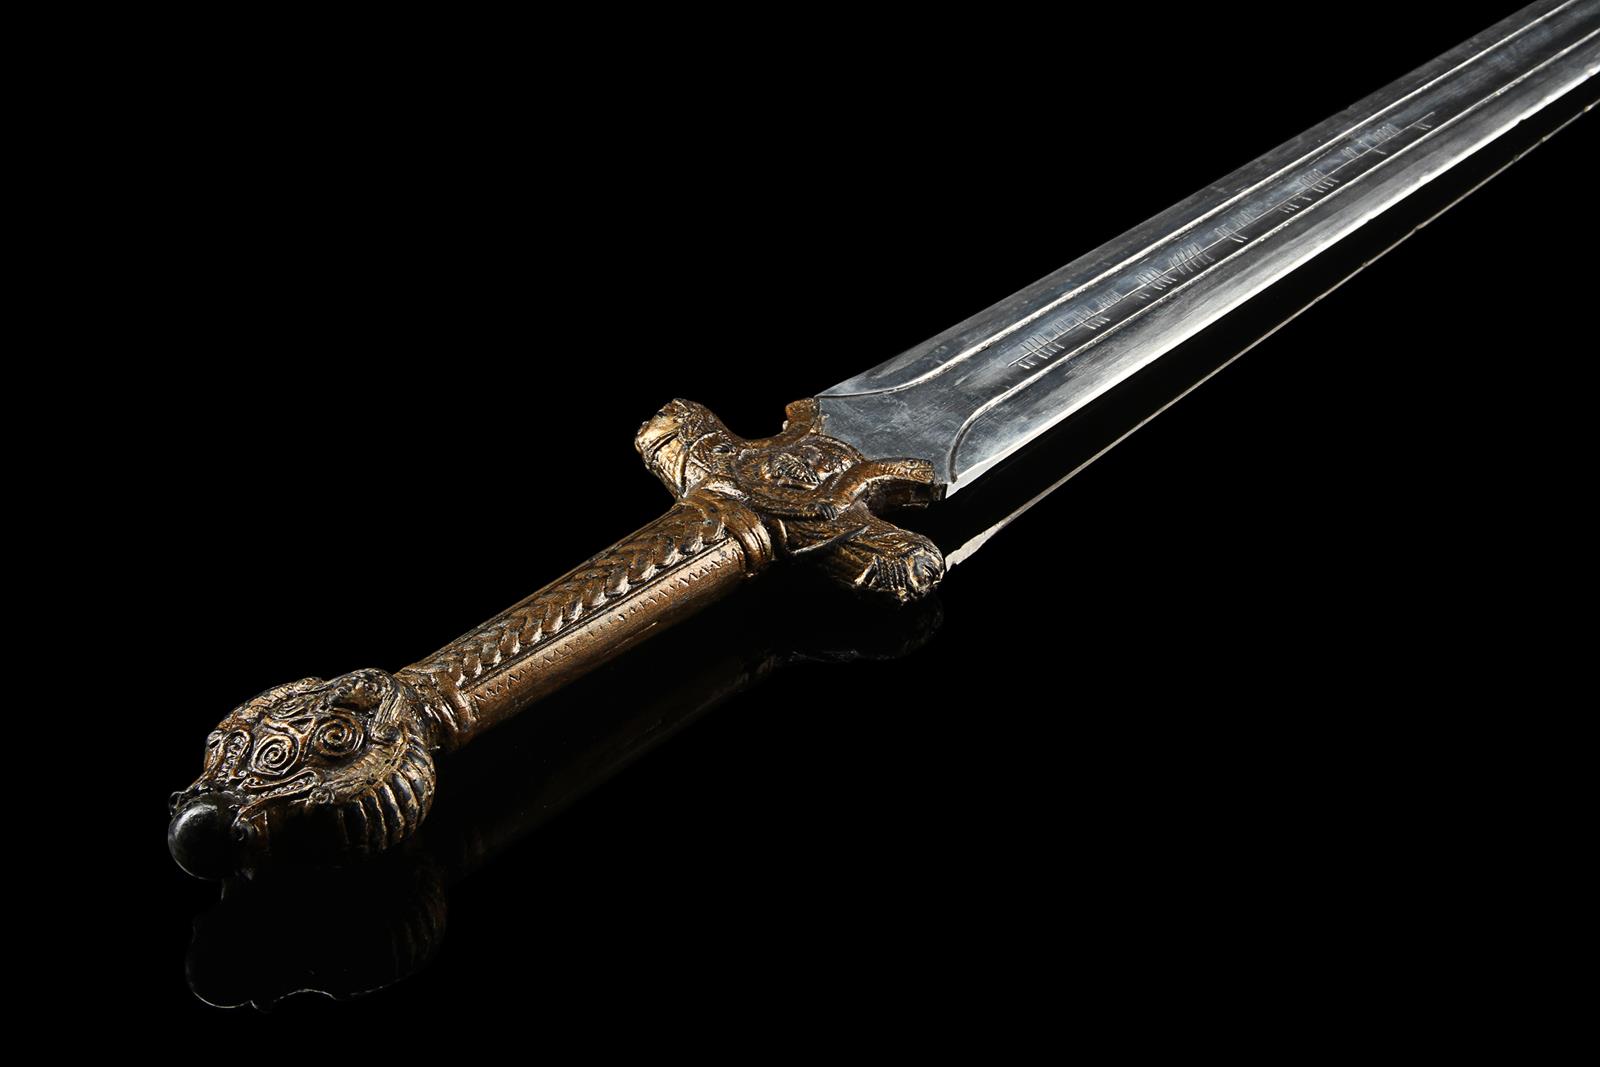 KING ARTHUR (2004) - Hero Excalibur Sword and Scabbard The fabled sword Excalibur from Antoine - Image 2 of 13